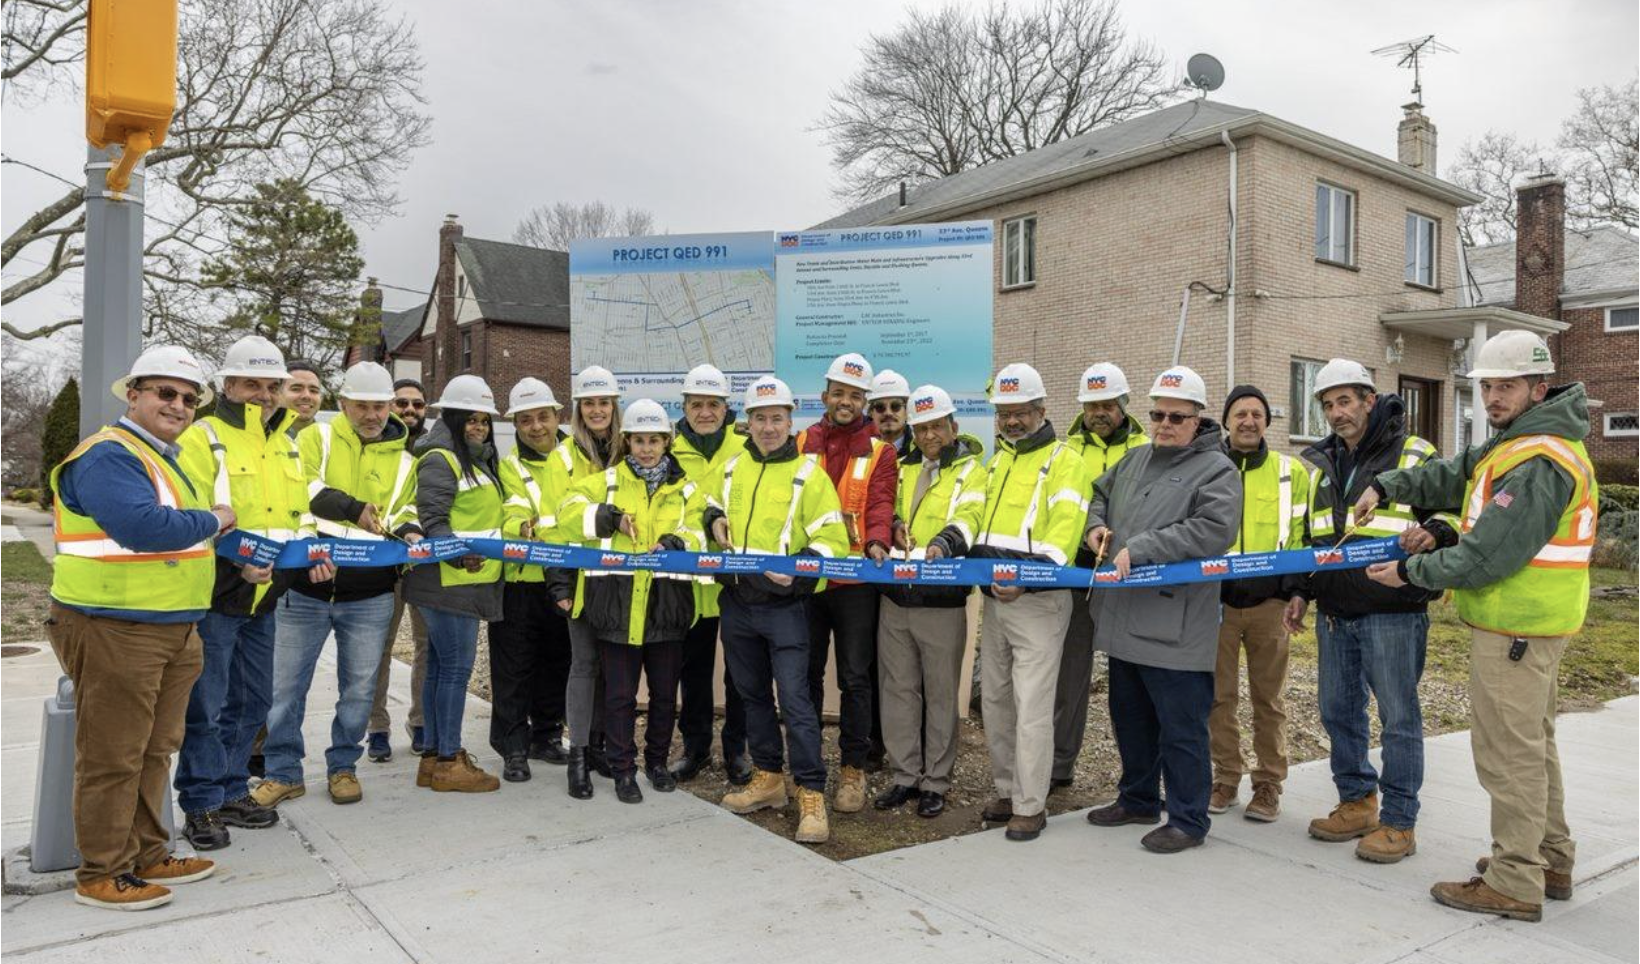 DDC Commissioner Thomas Foley (center), the DDC project team, consultants and contractors celebrate the completion of the $79.7 million project that rebuilt 3.5 miles of streets.